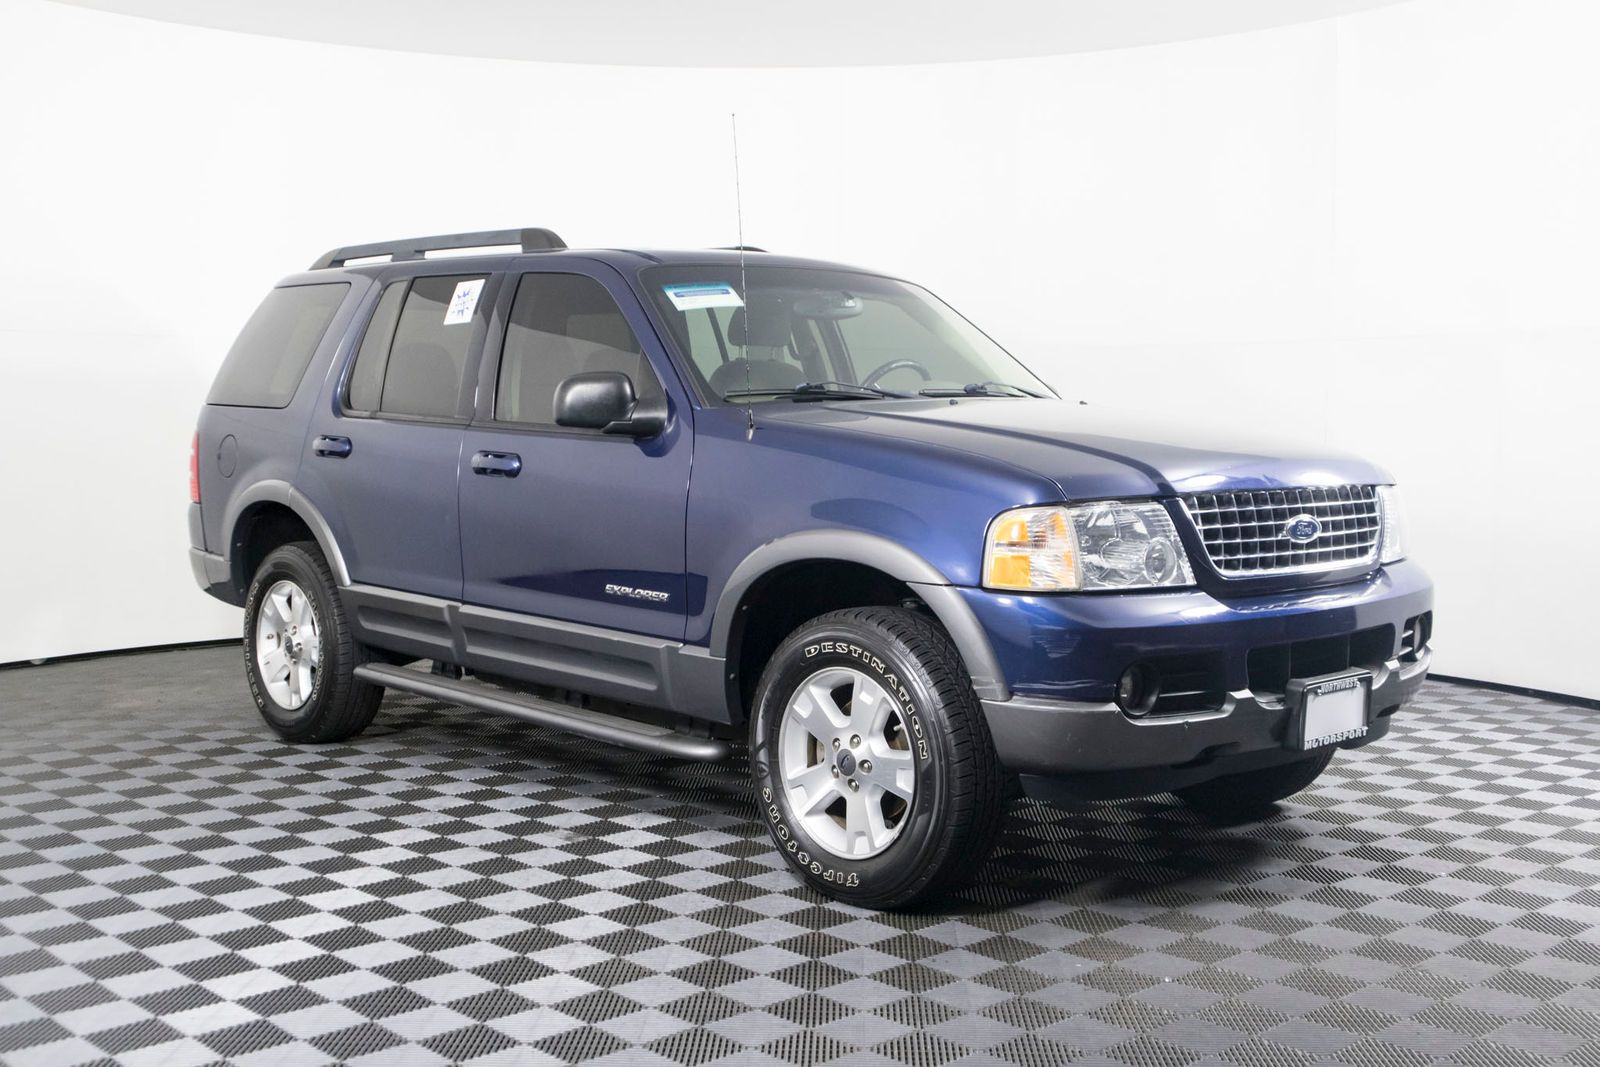 Used 2005 Ford Explorer XLT RWD SUV For Sale - Northwest Motorsport | Ford  explorer xlt, Ford explorer, Ford suv